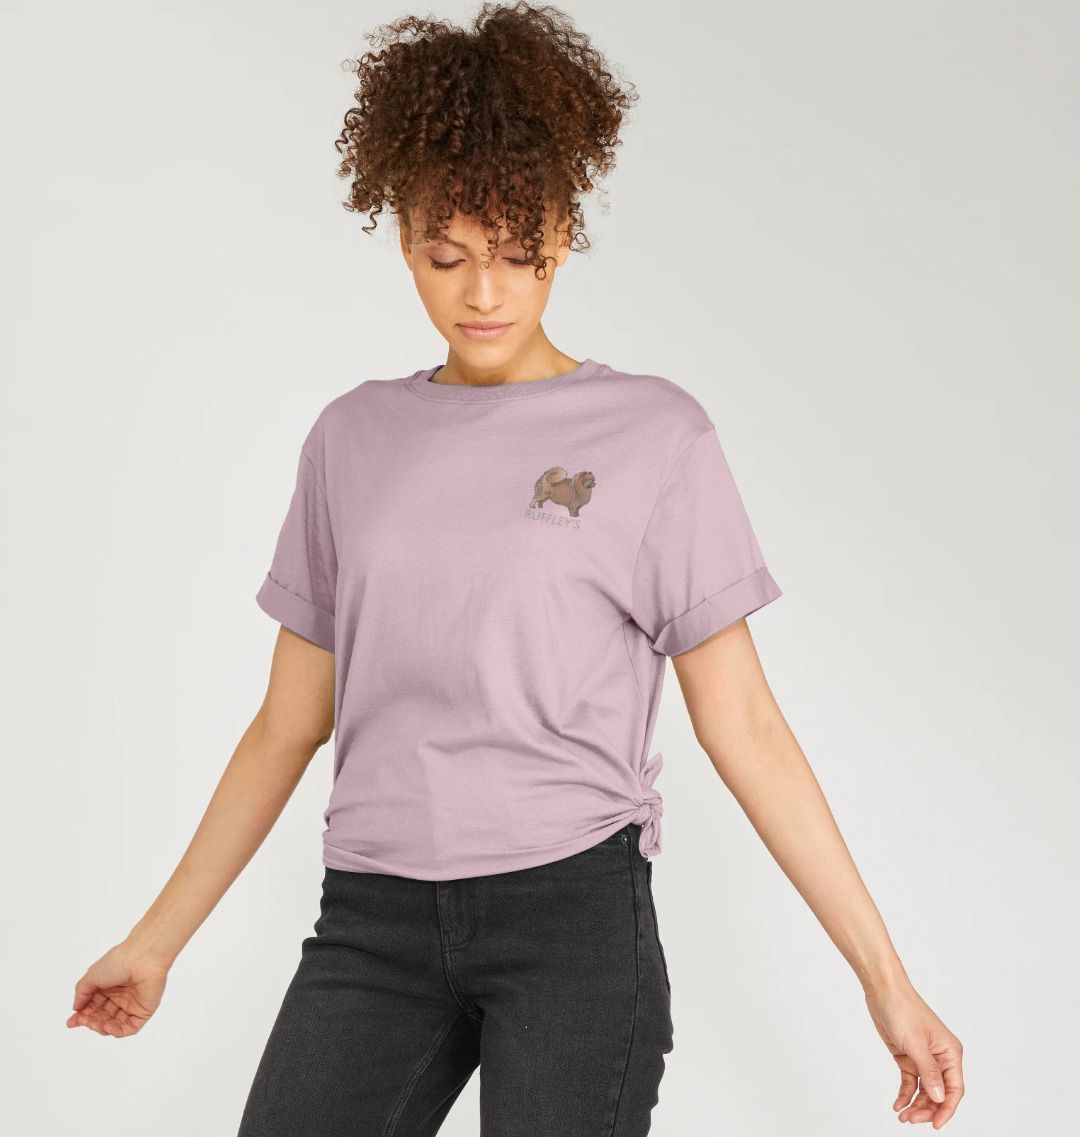 Pomeranian - Relaxed Fit T-Shirt